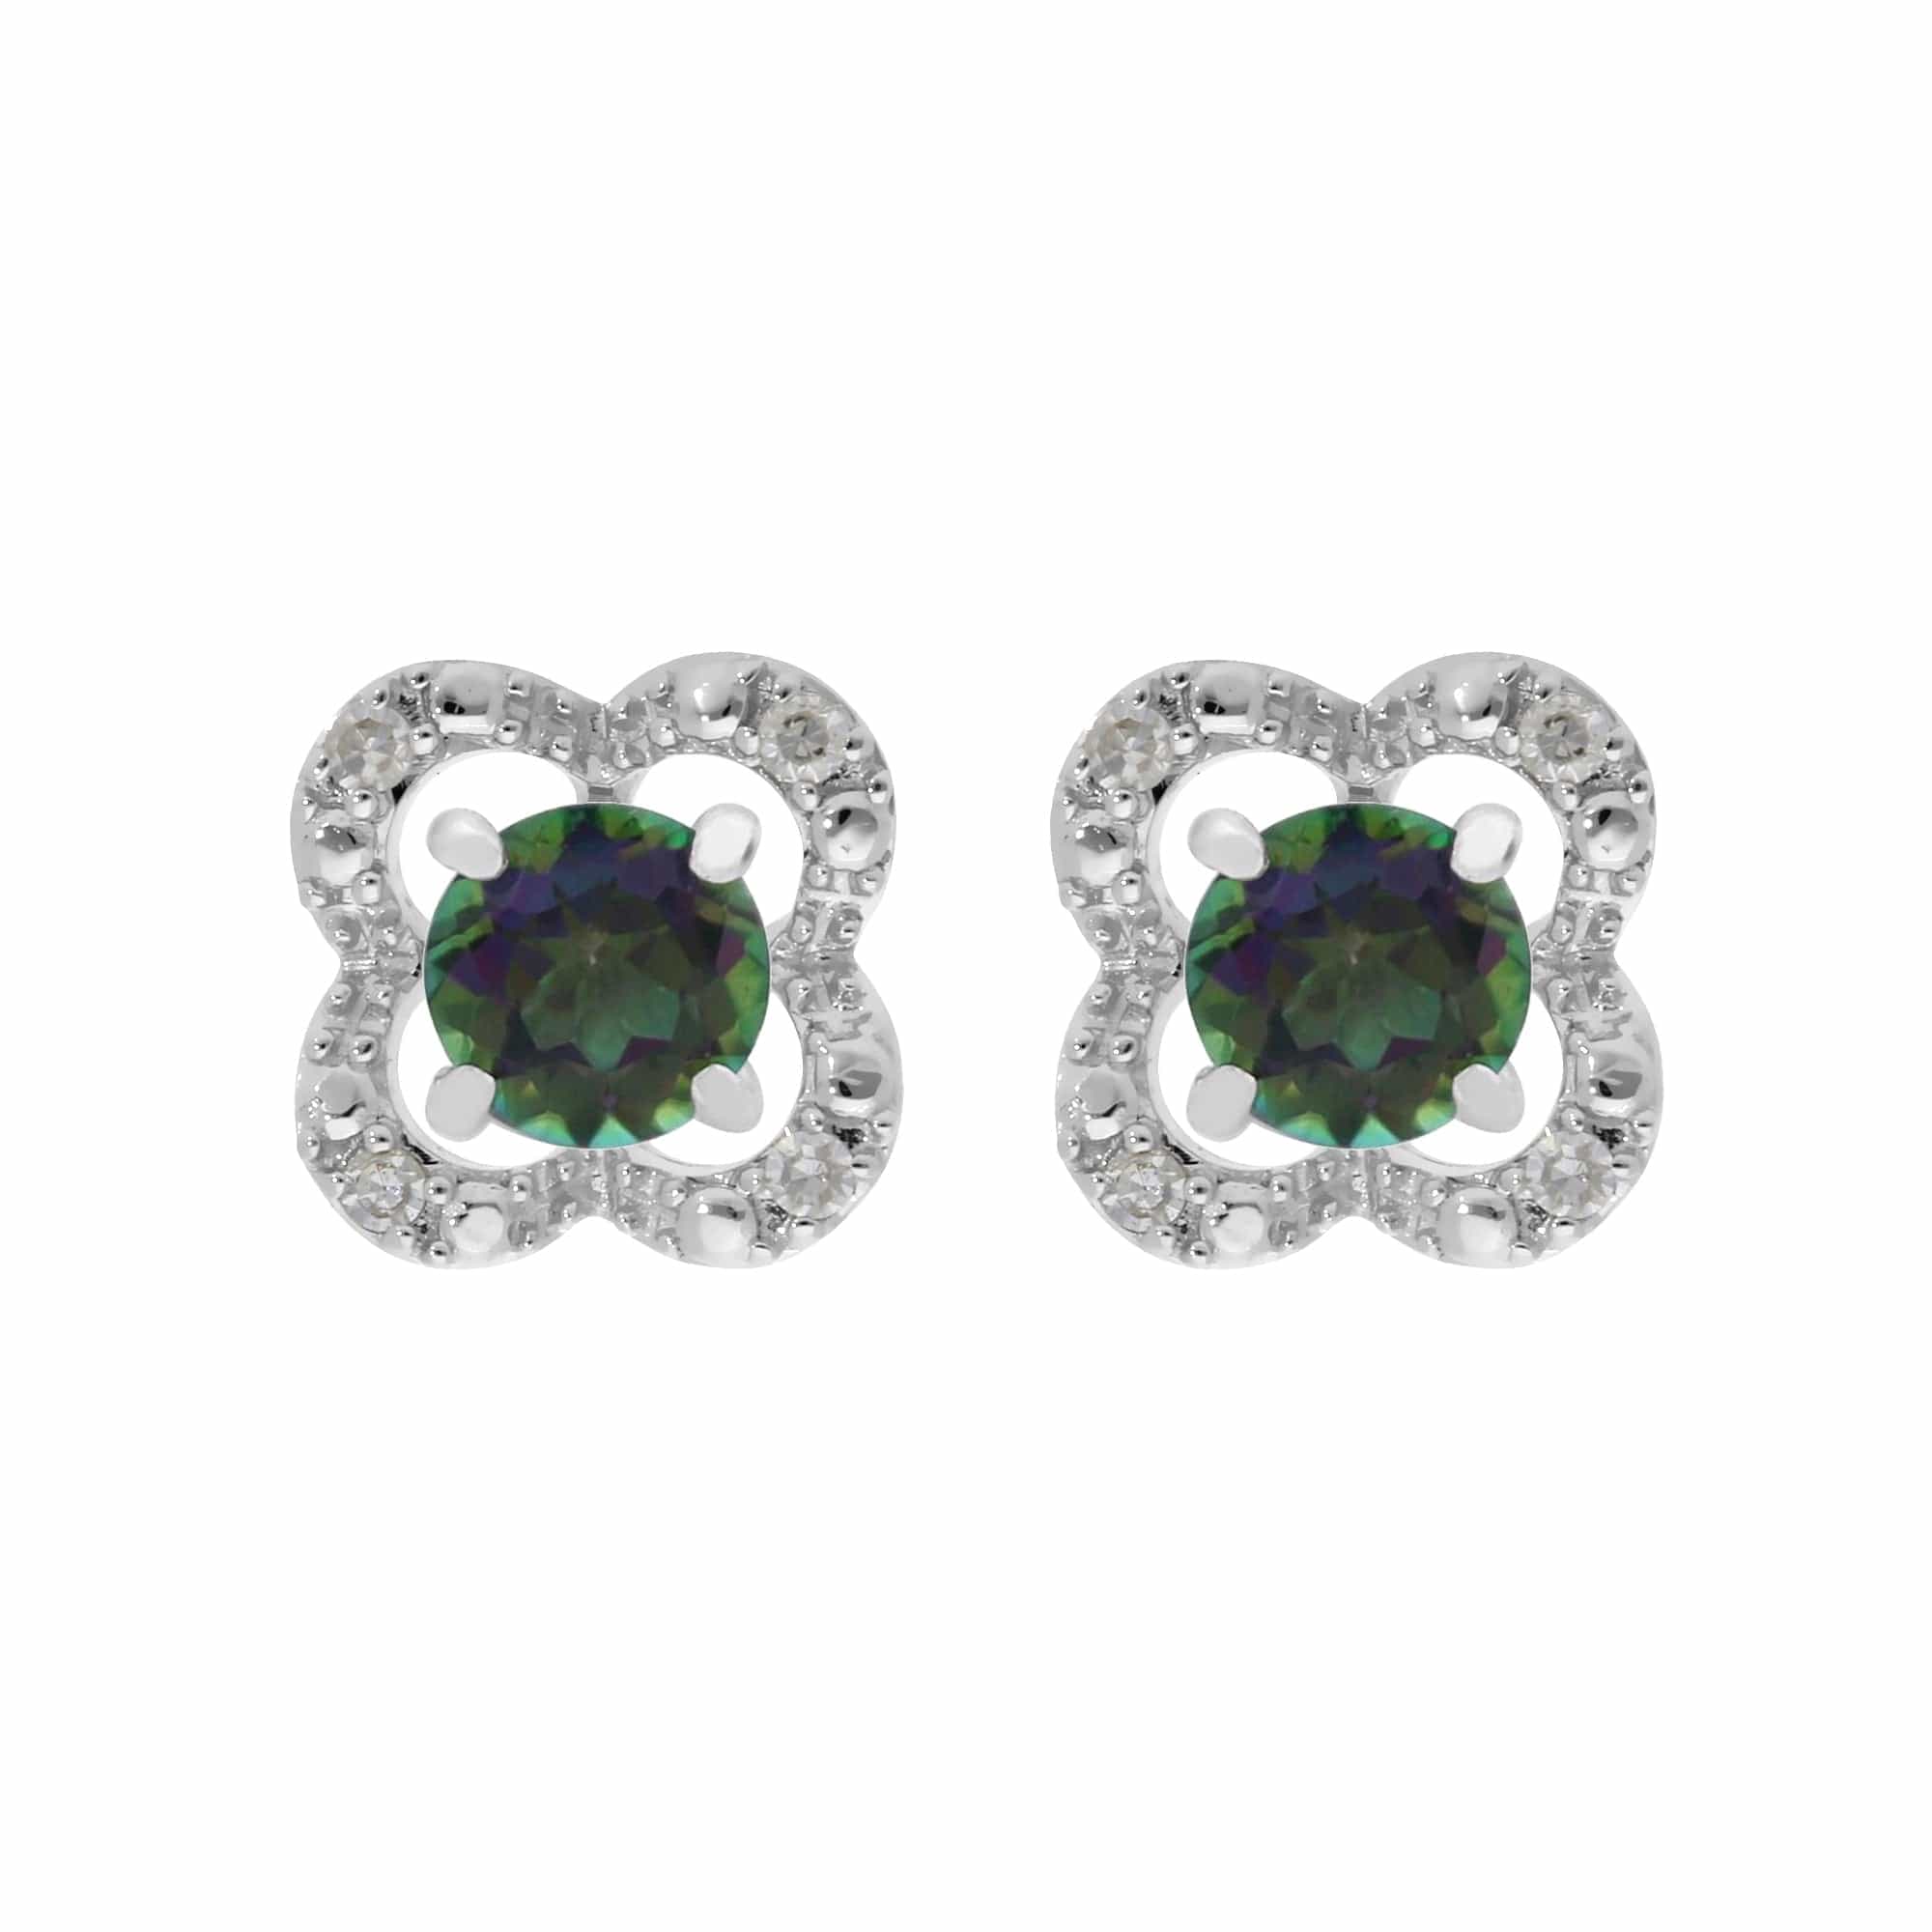 162E0071169-162E0244019 Classic Round Mystic Topaz Studs with Detachable Diamond Flower Ear Jacket in 9ct White Gold 1